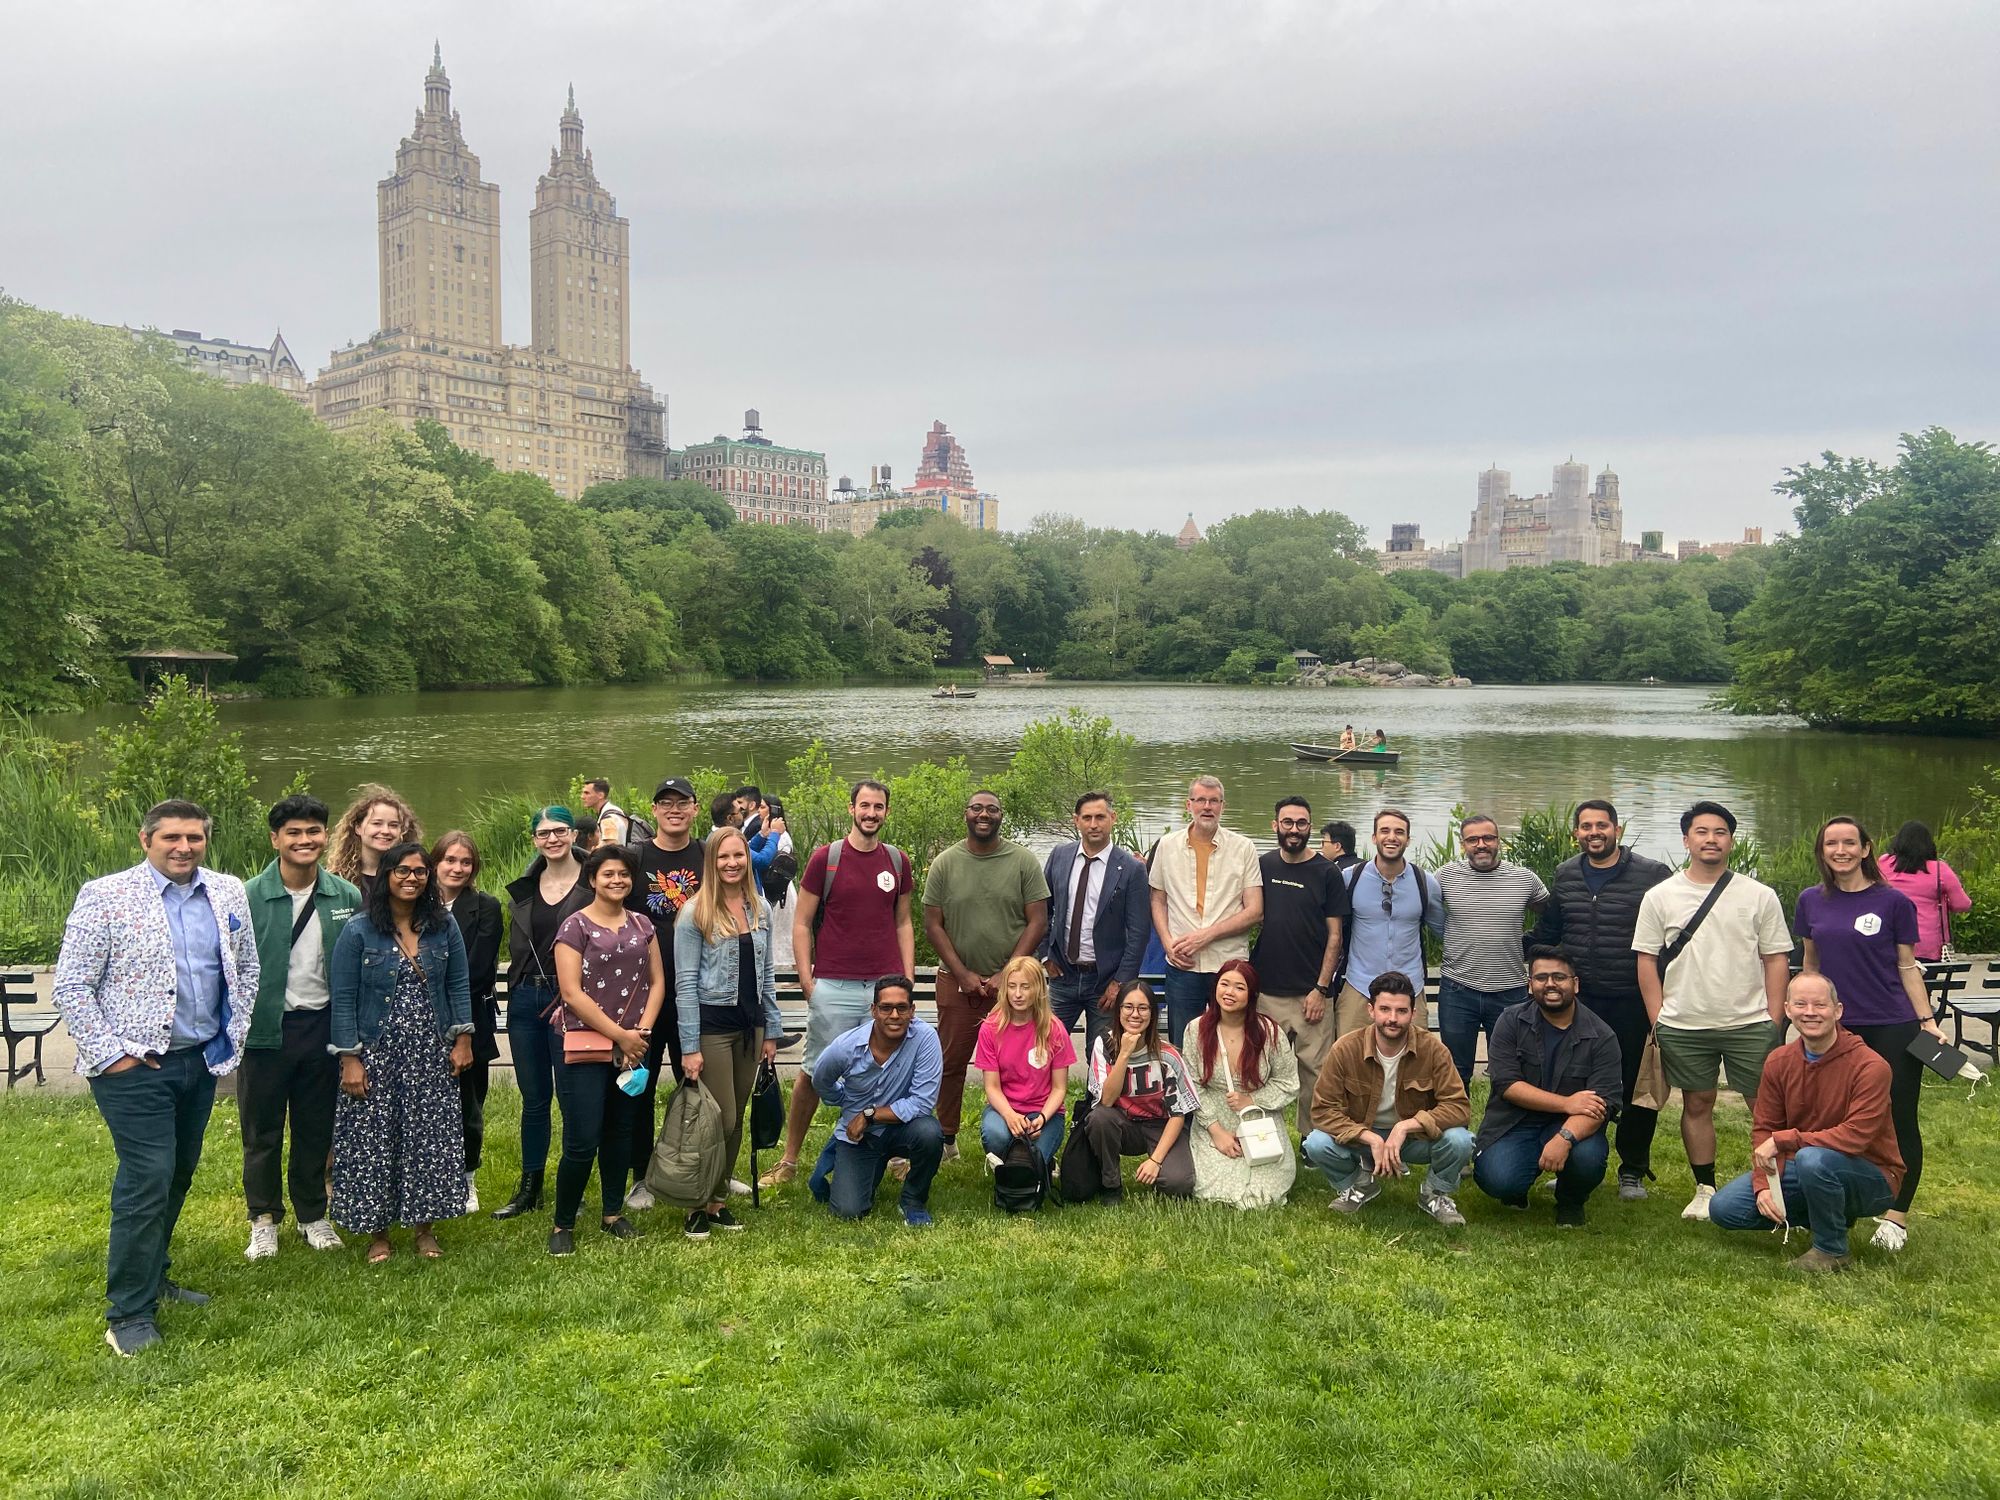 Around 30 people posing for a photo in central park as part of the UXDX USA walking tour